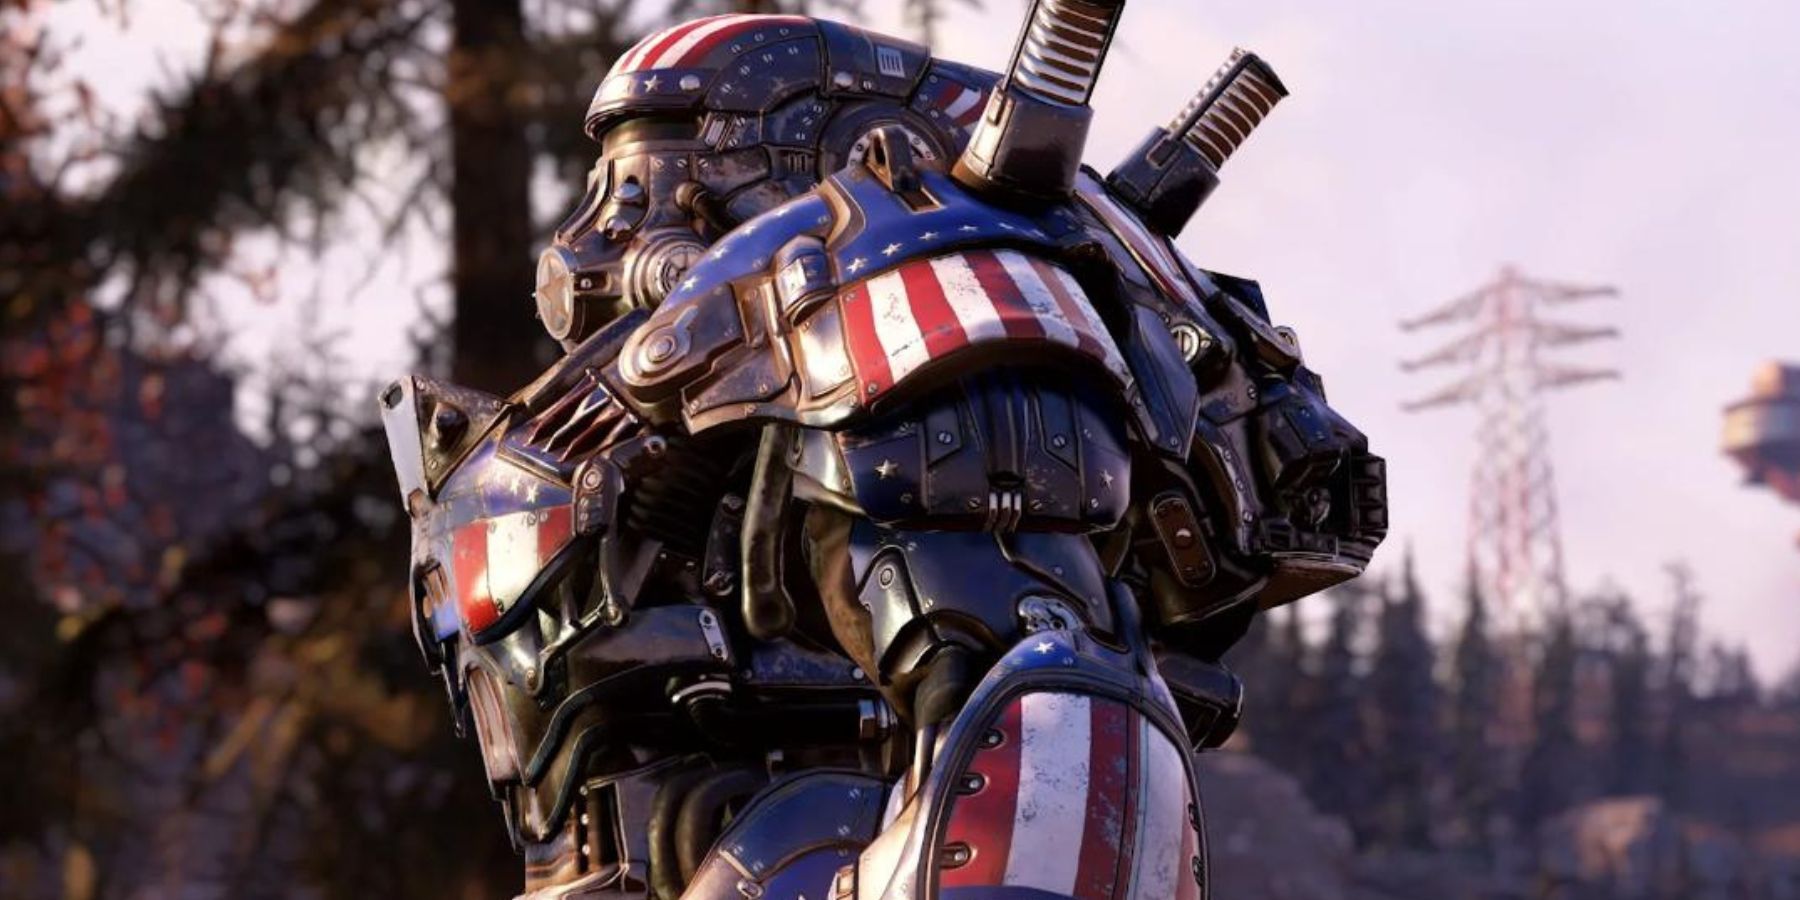 image showing the hellcat power armor in fallout 76.